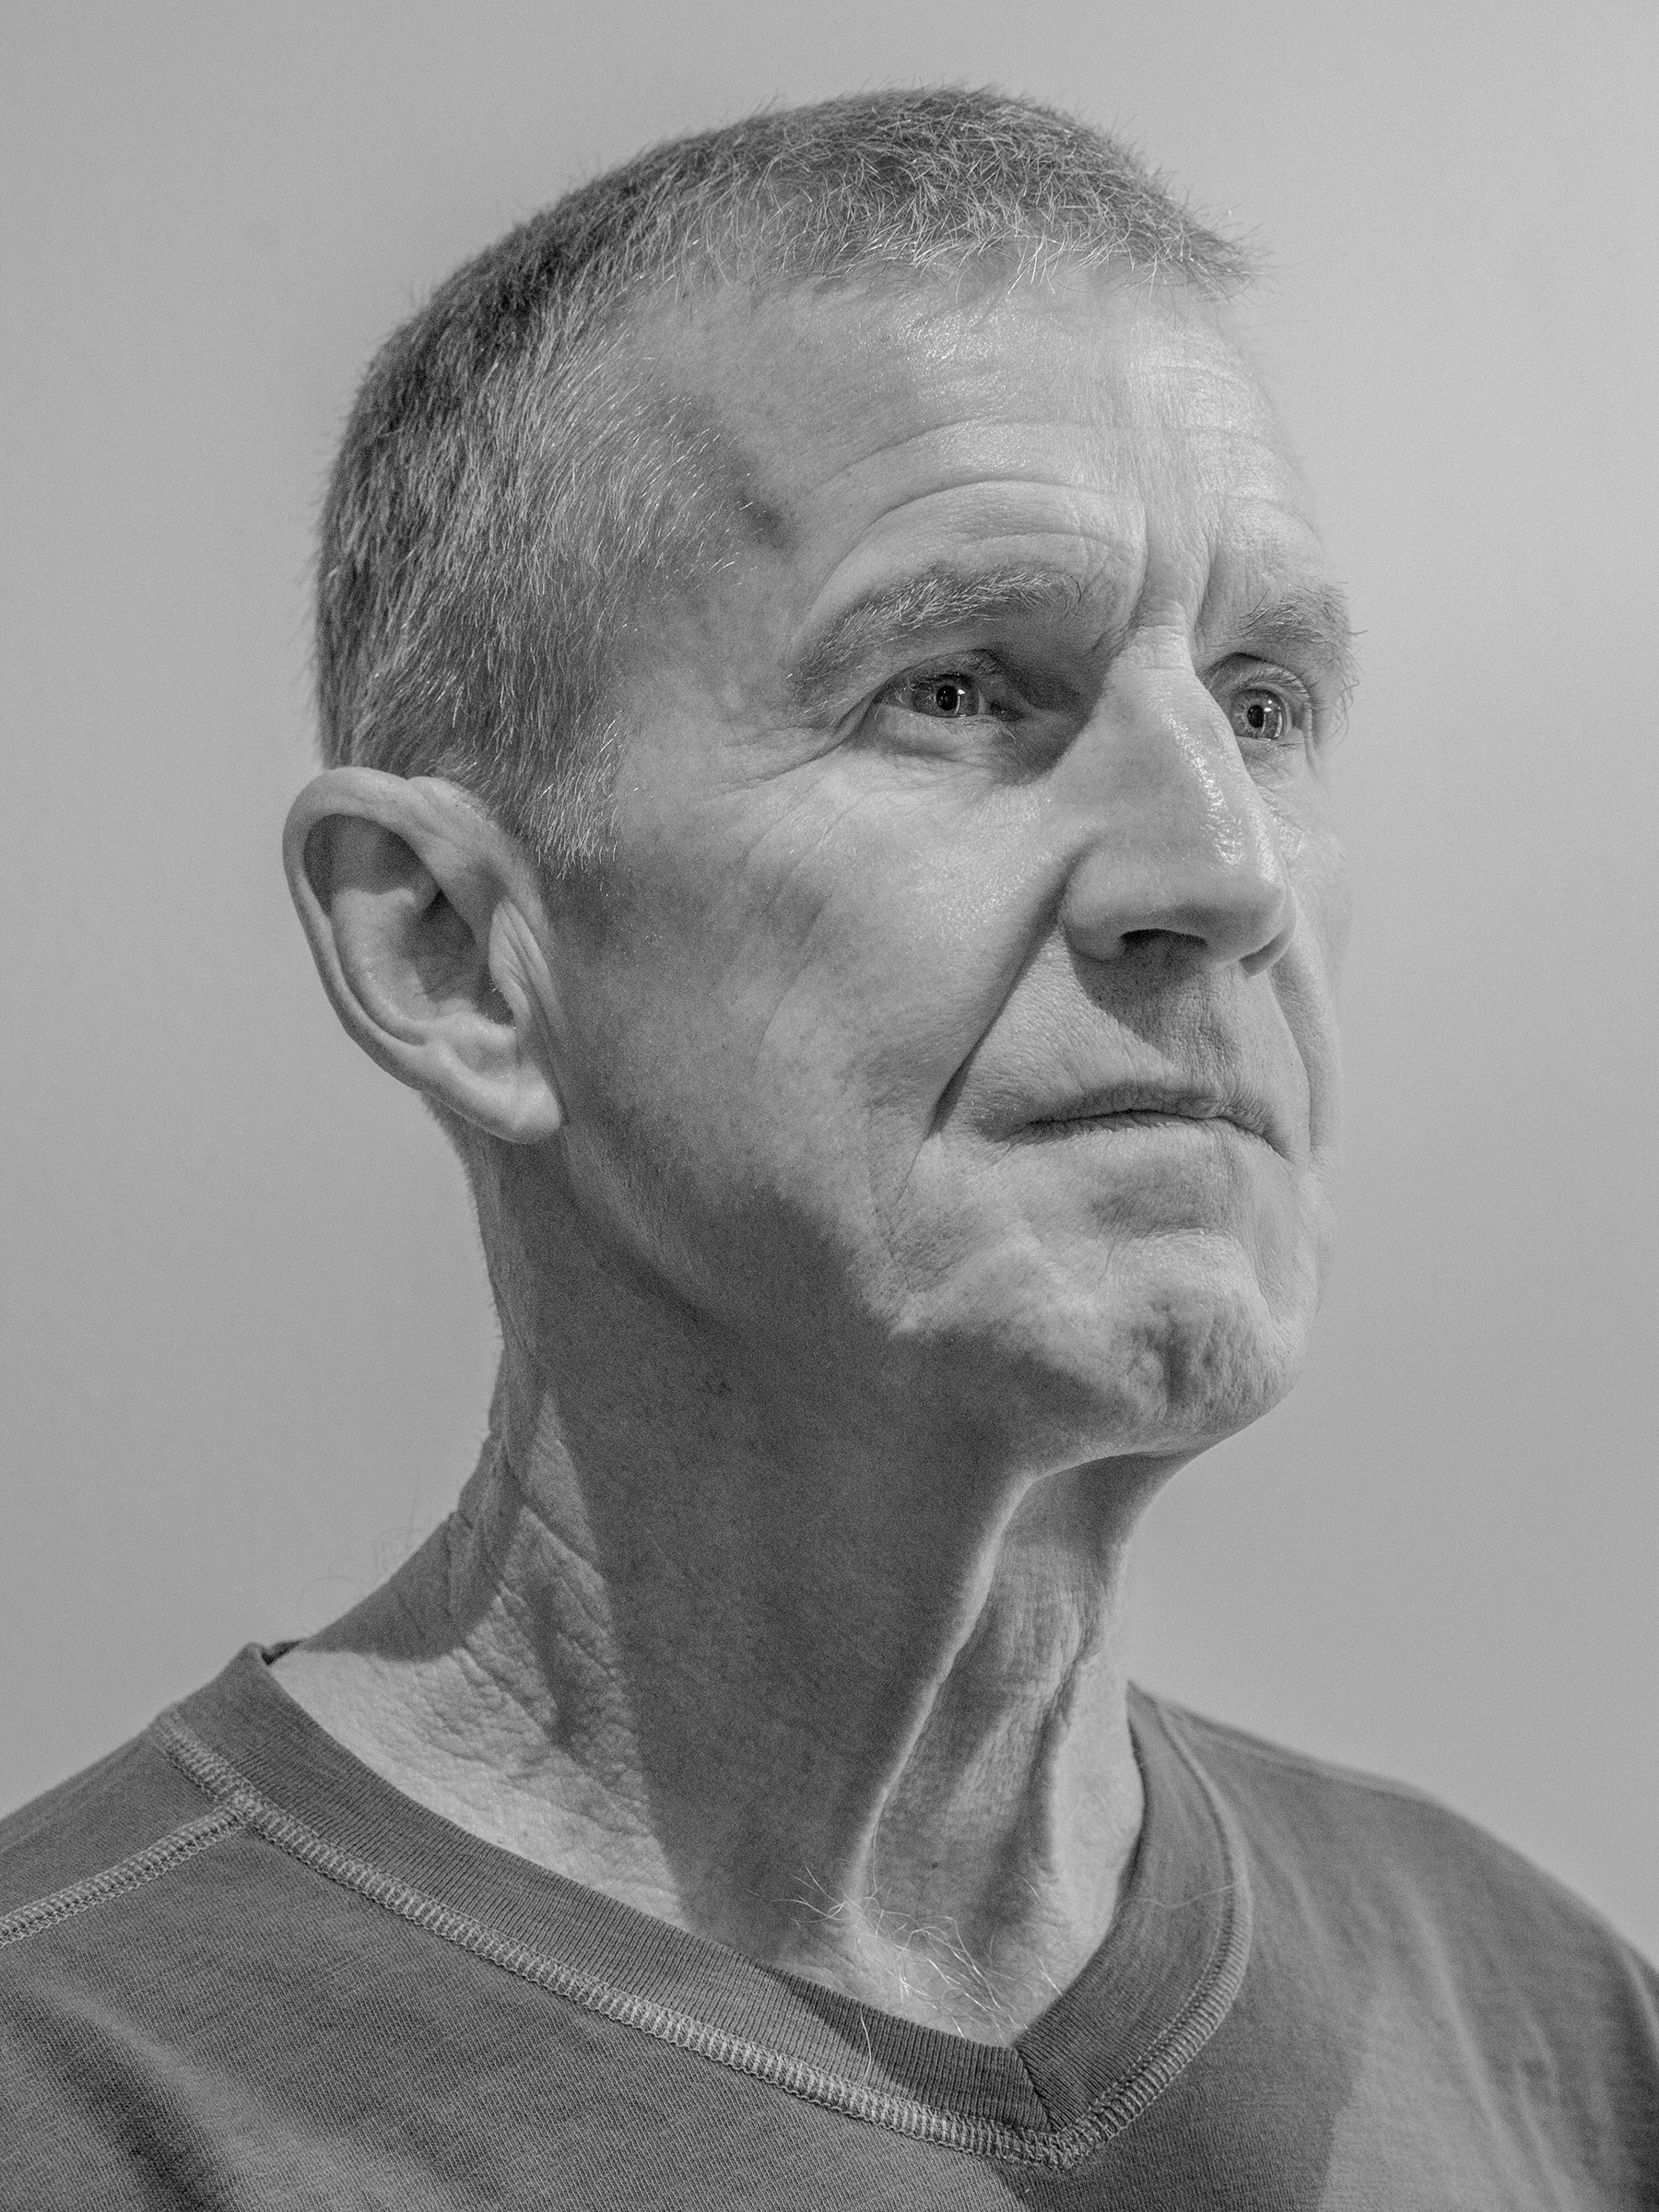 <strong>Gen. Stanley McChrystal</strong> photographed in Alexandria, Va. "<a href="https://time.com/6103633/stanley-mcchrystal-afghanistan-risk-book/">Gen. Stanley McChrystal Would Have Done Things Differently in Afghanistan</a>," Oct. 25 issue. (Peter van Agtmael for TIME)